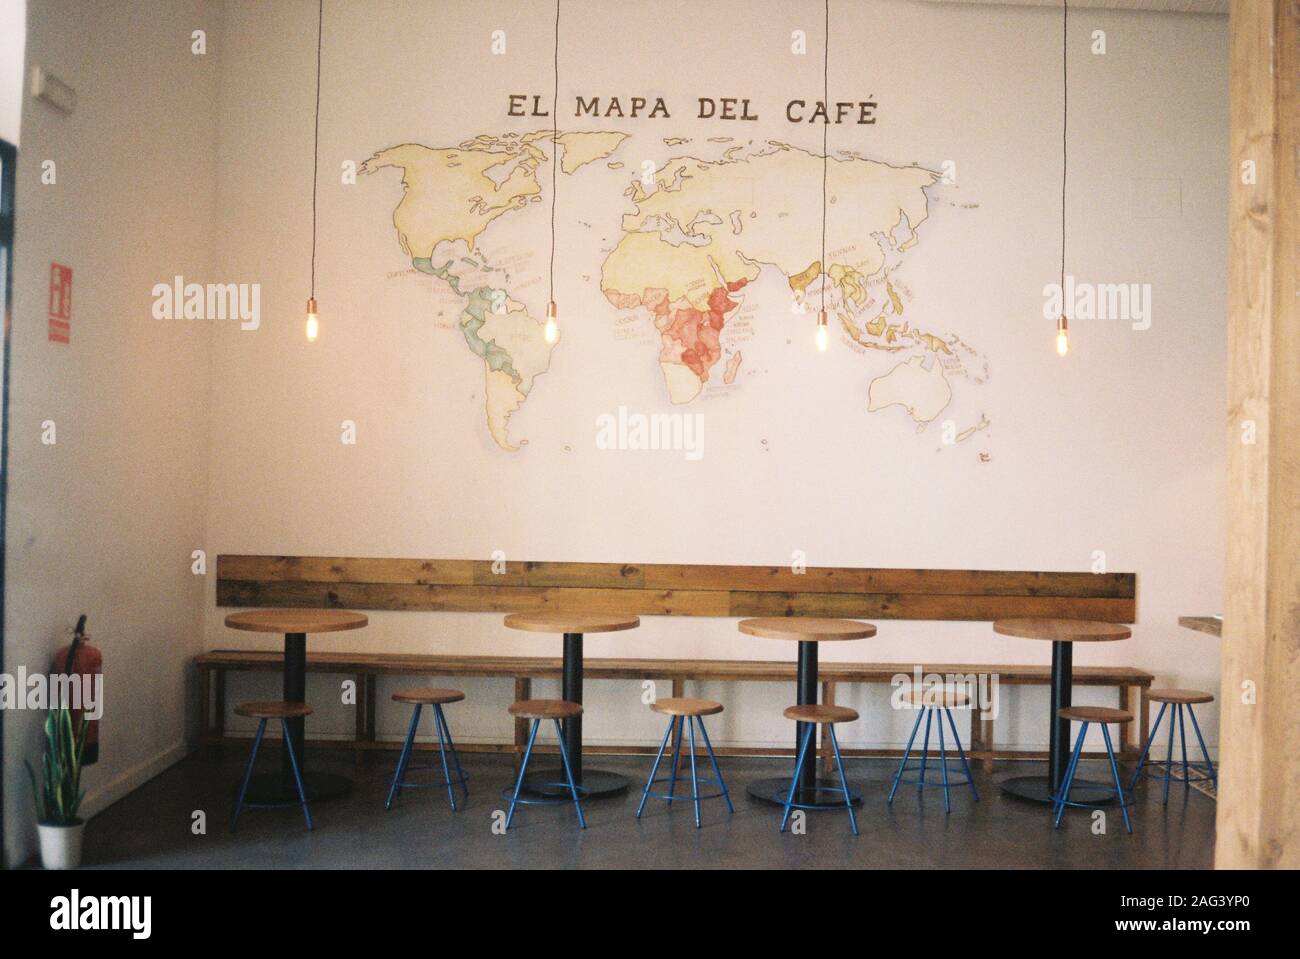 Inside shot of a cafe with round tables and chairs near a map of coffee print on the wall Stock Photo